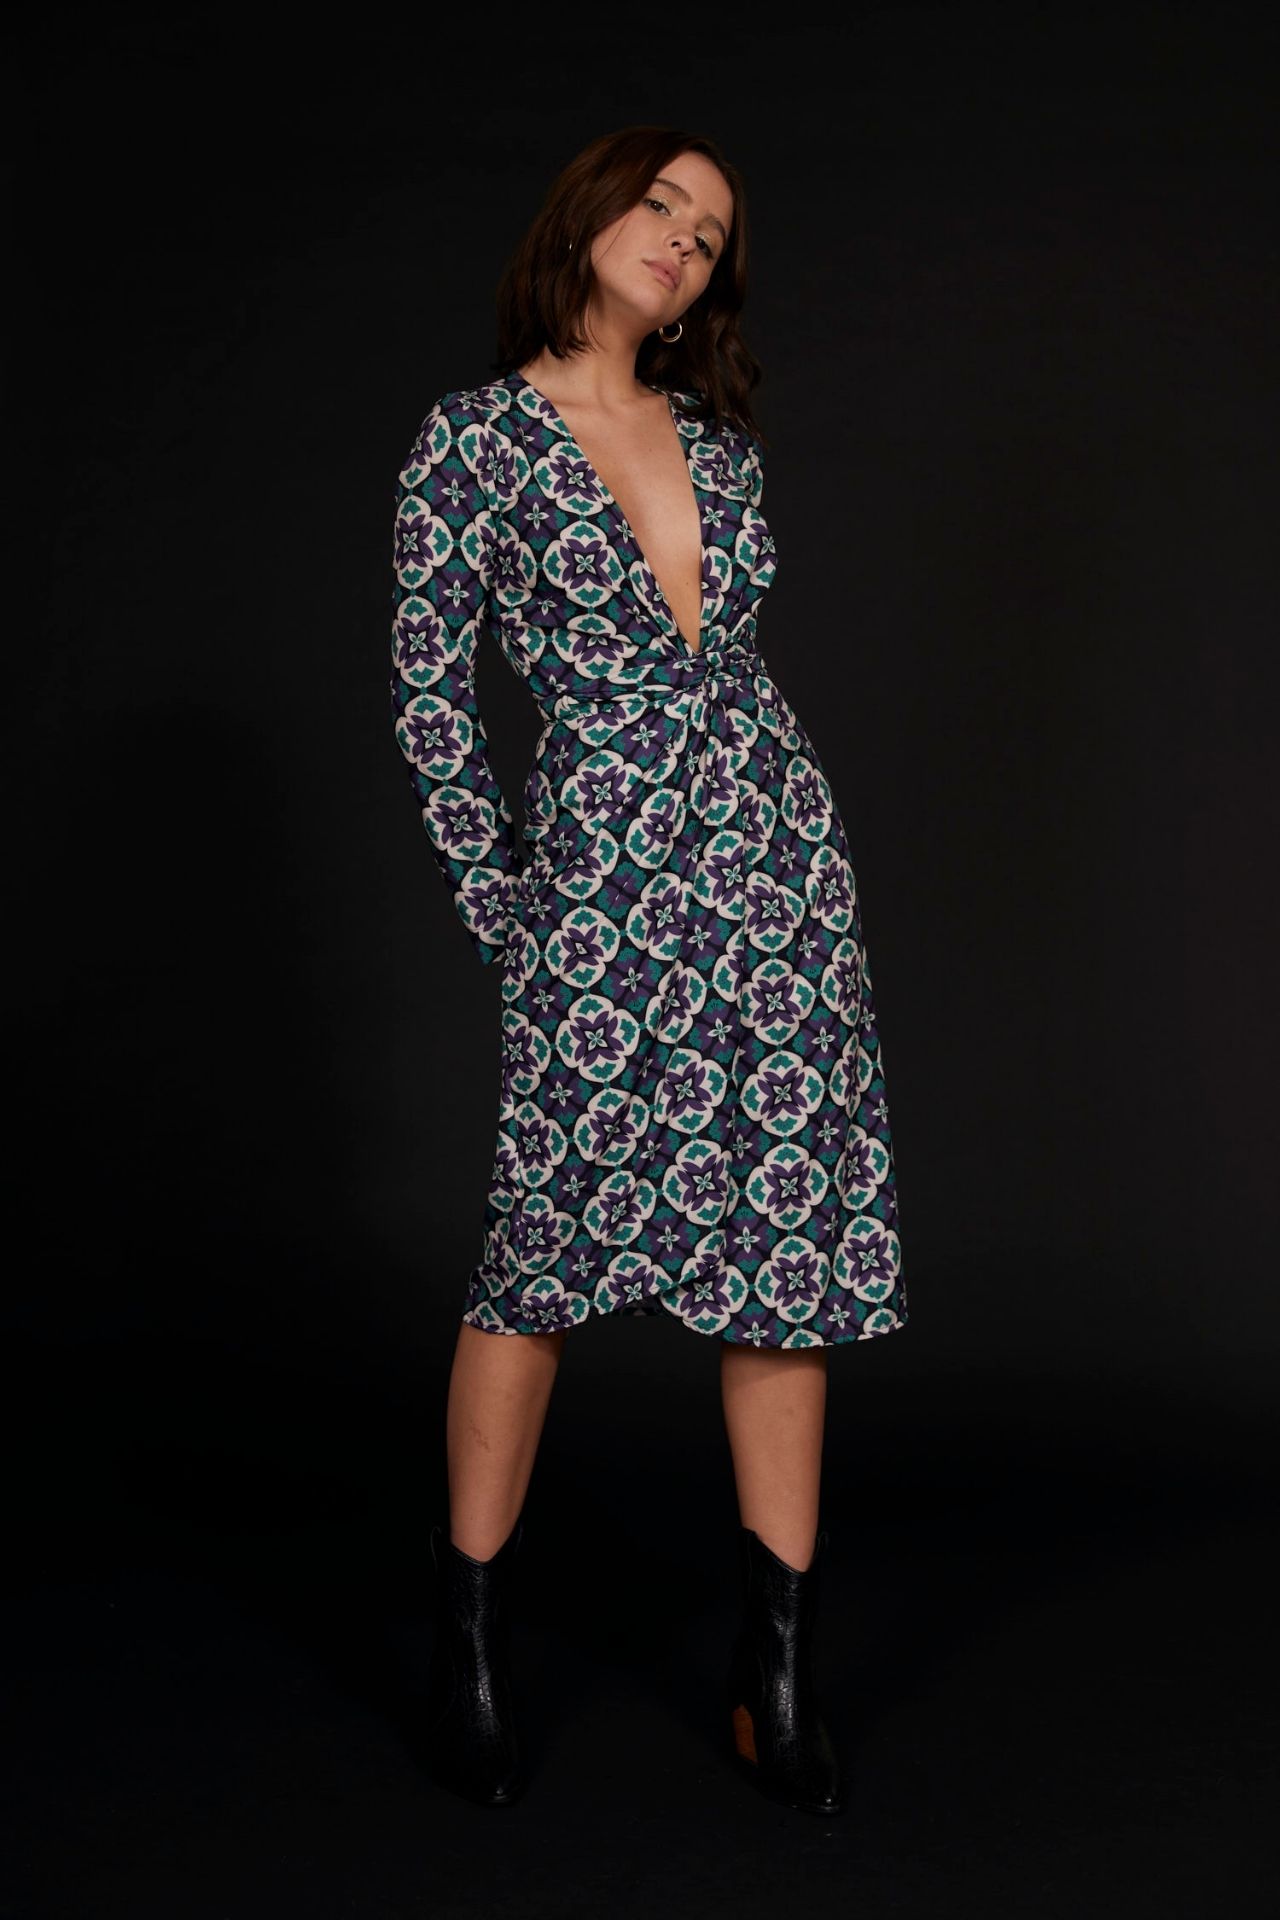 Multifunctional midi dress made in 100% recycled materials in our amazing kaleidoscope print.

*Model is wearing size S
